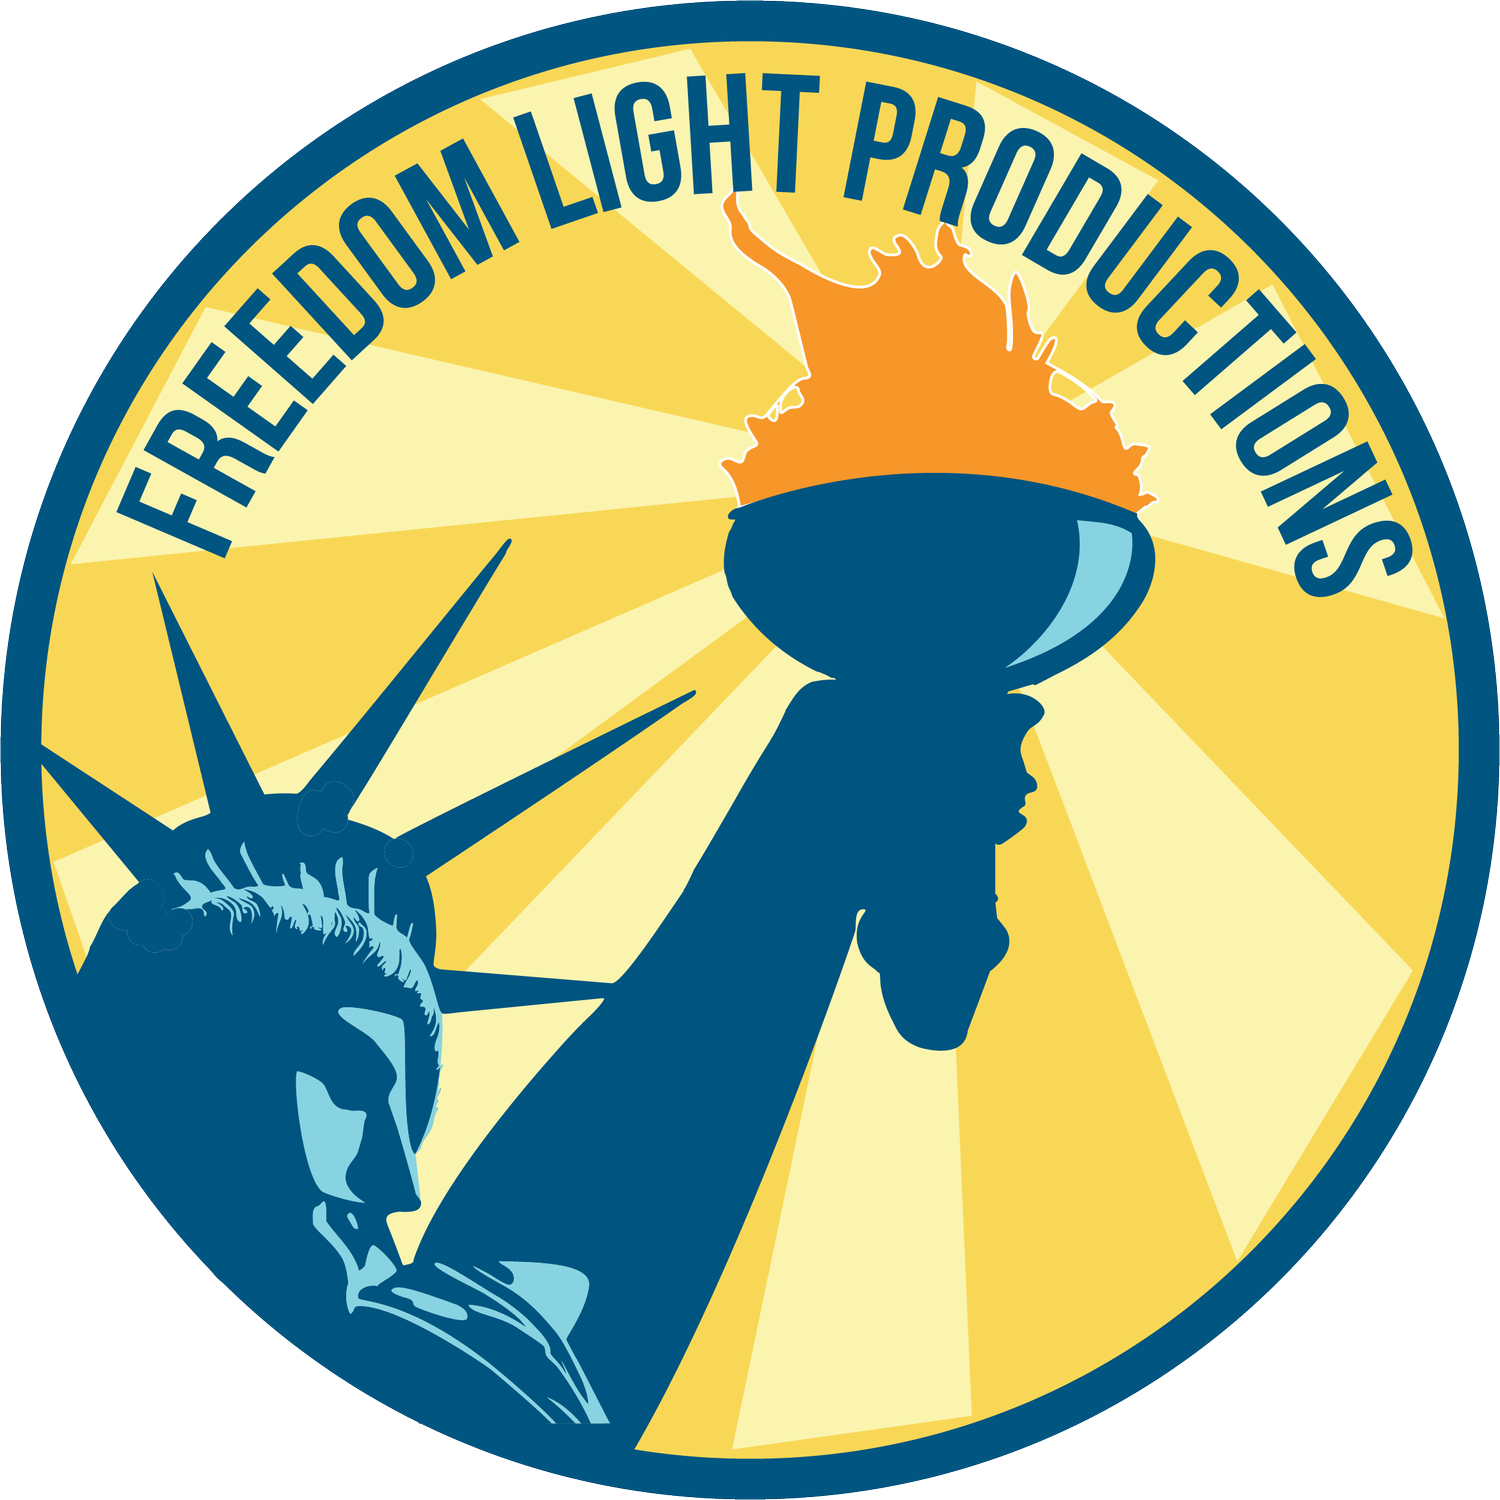 Freedom Light Productions 